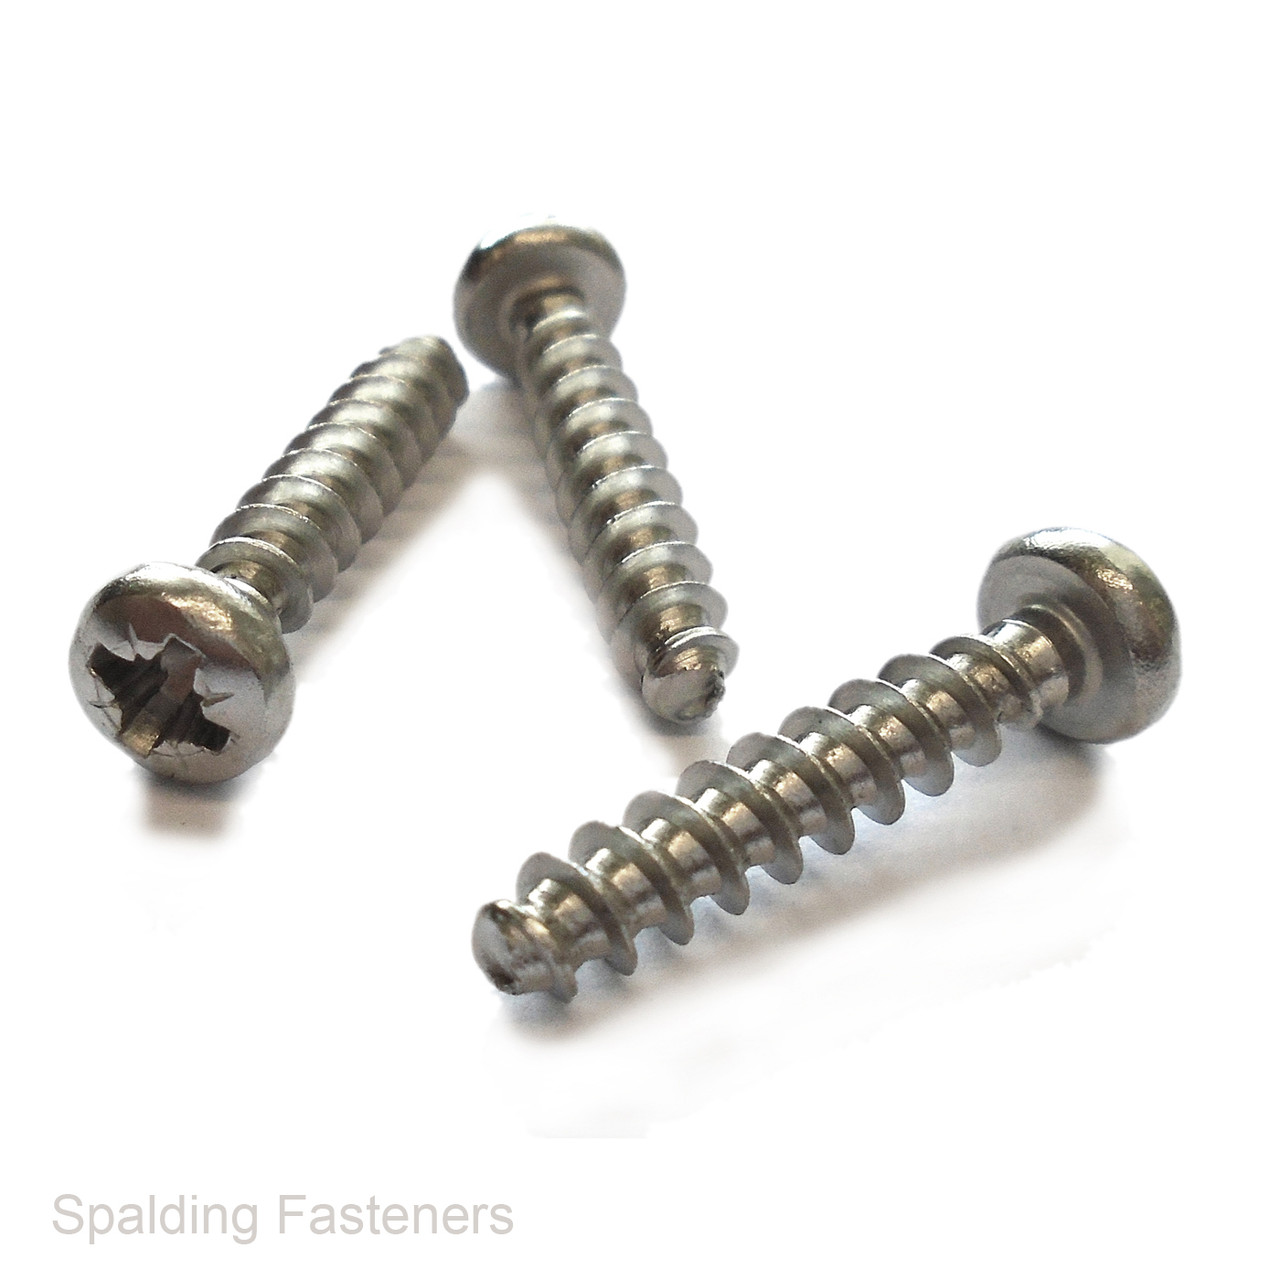 A2 Stainless Steel Polytech 30 Pan Pozi Screws For Plastic